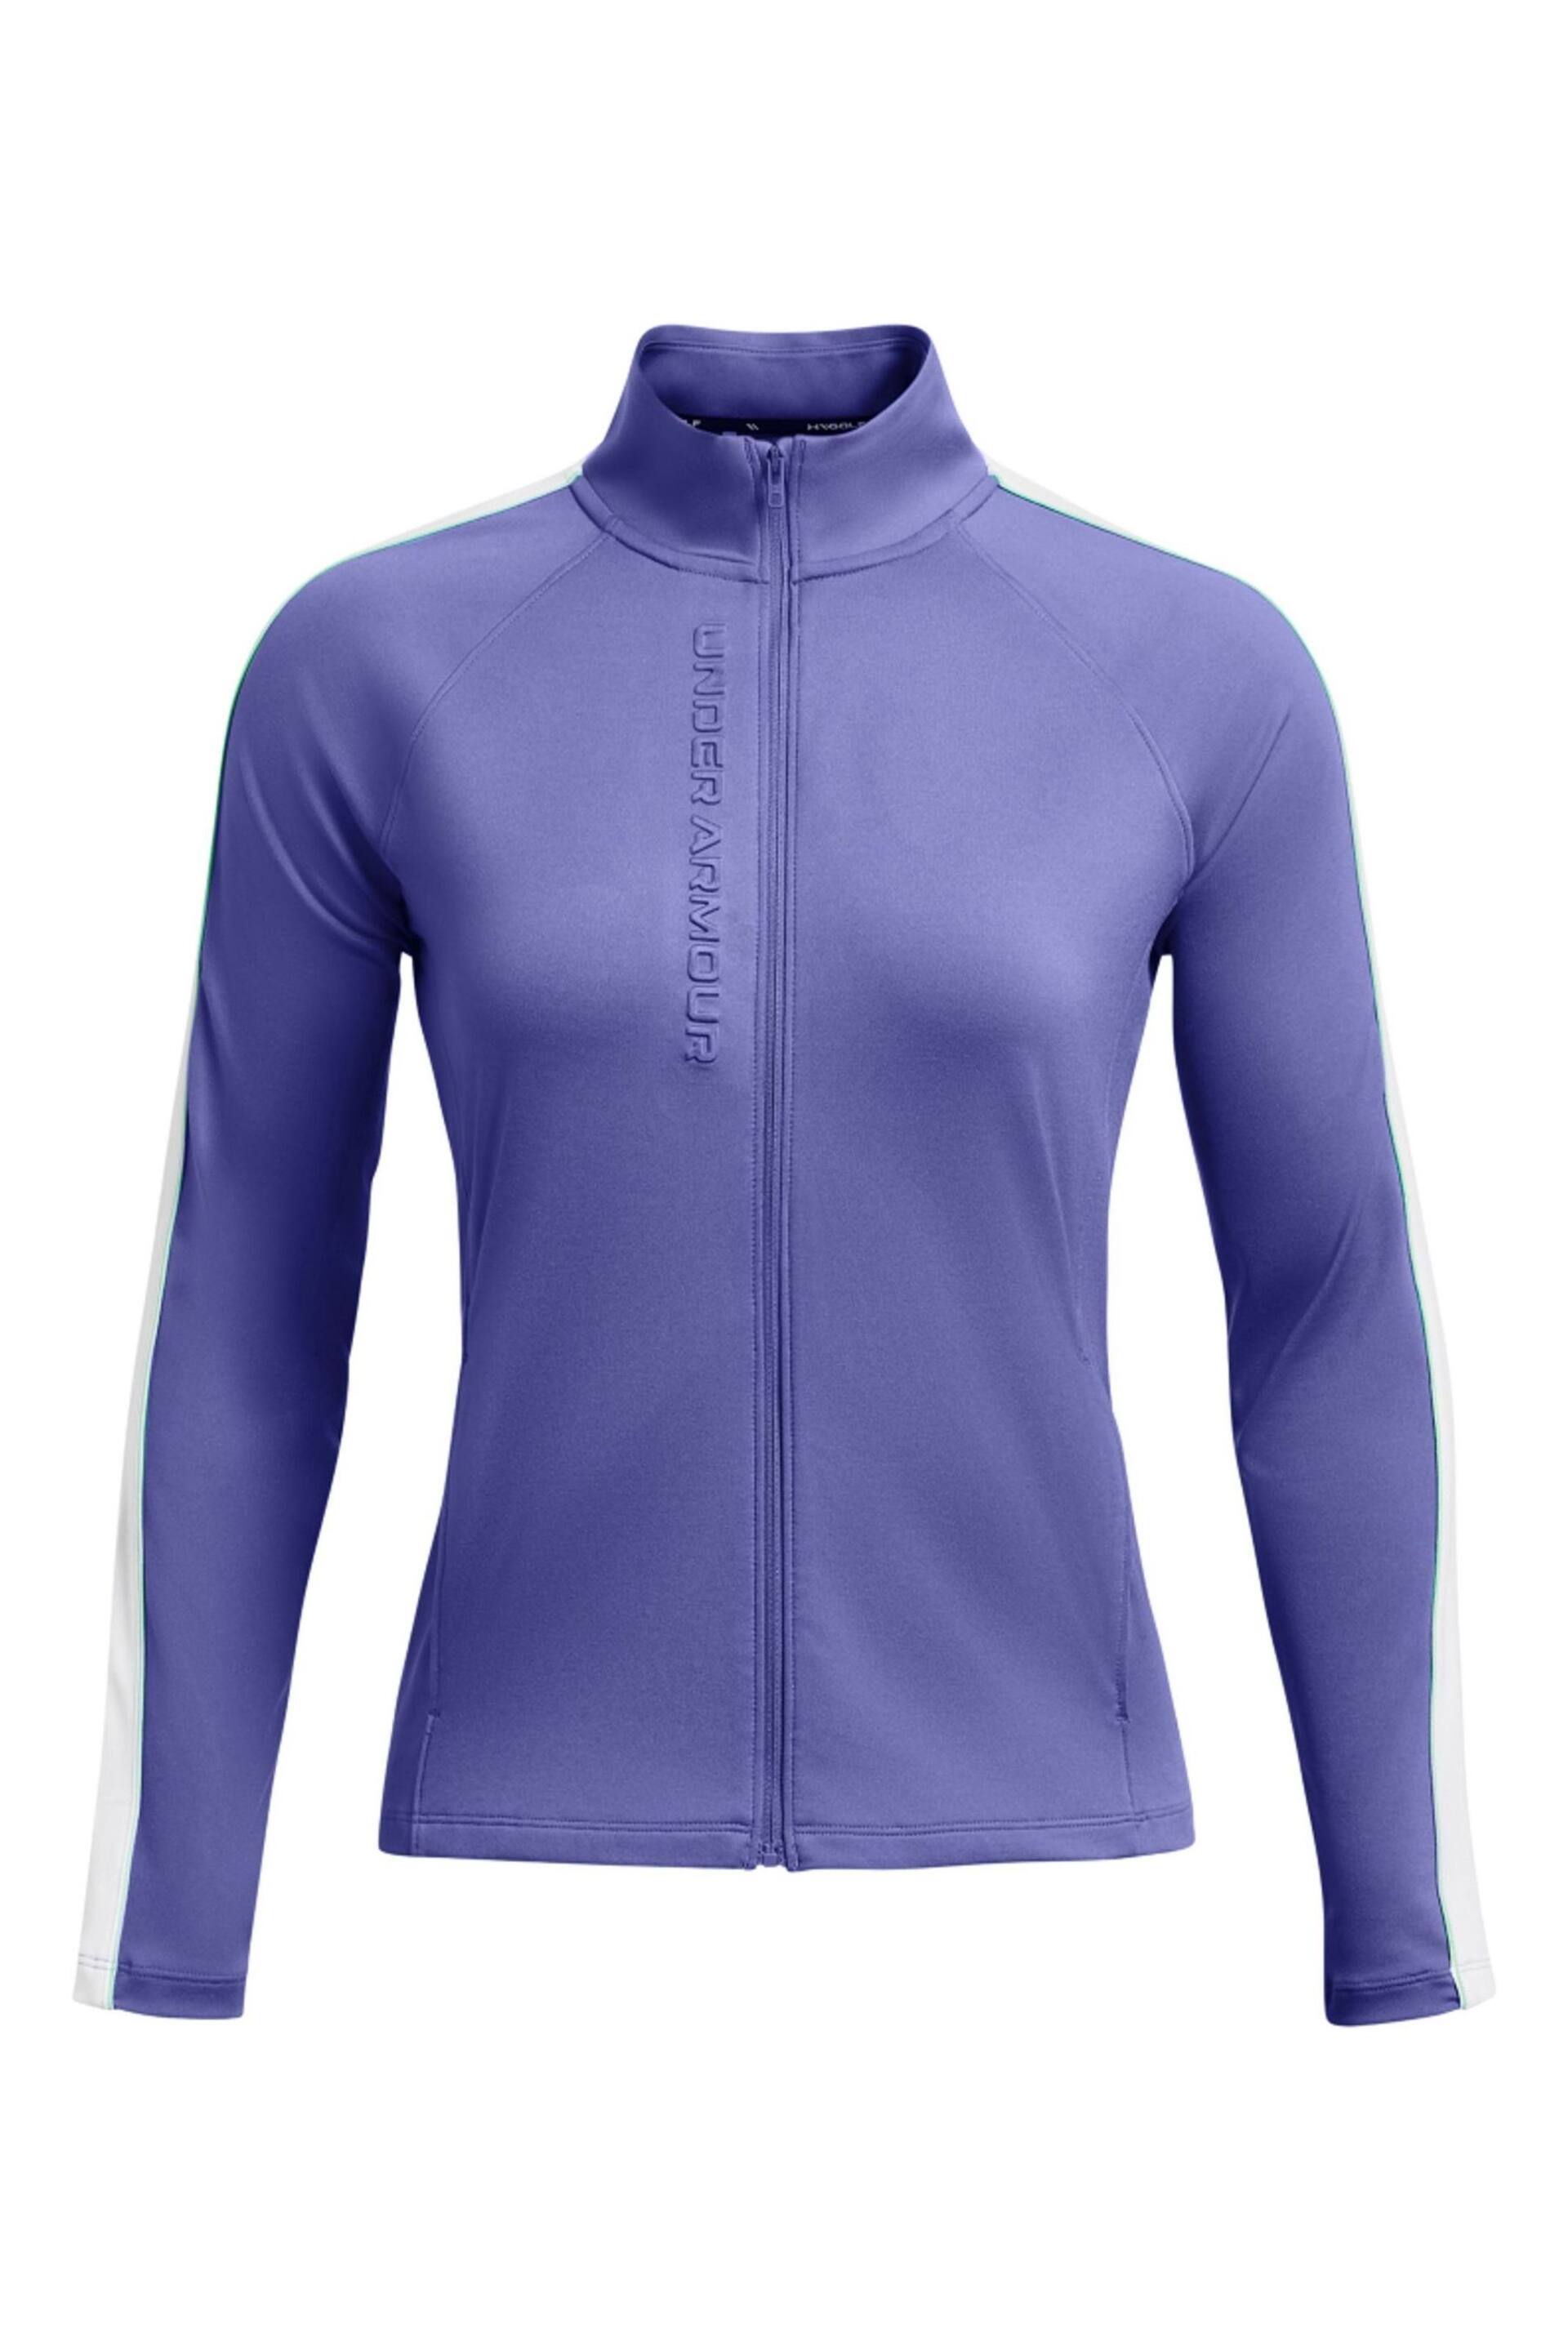 Under Armour Blue/White Storm Midlayer Full Zip Sweat Top - Image 4 of 6